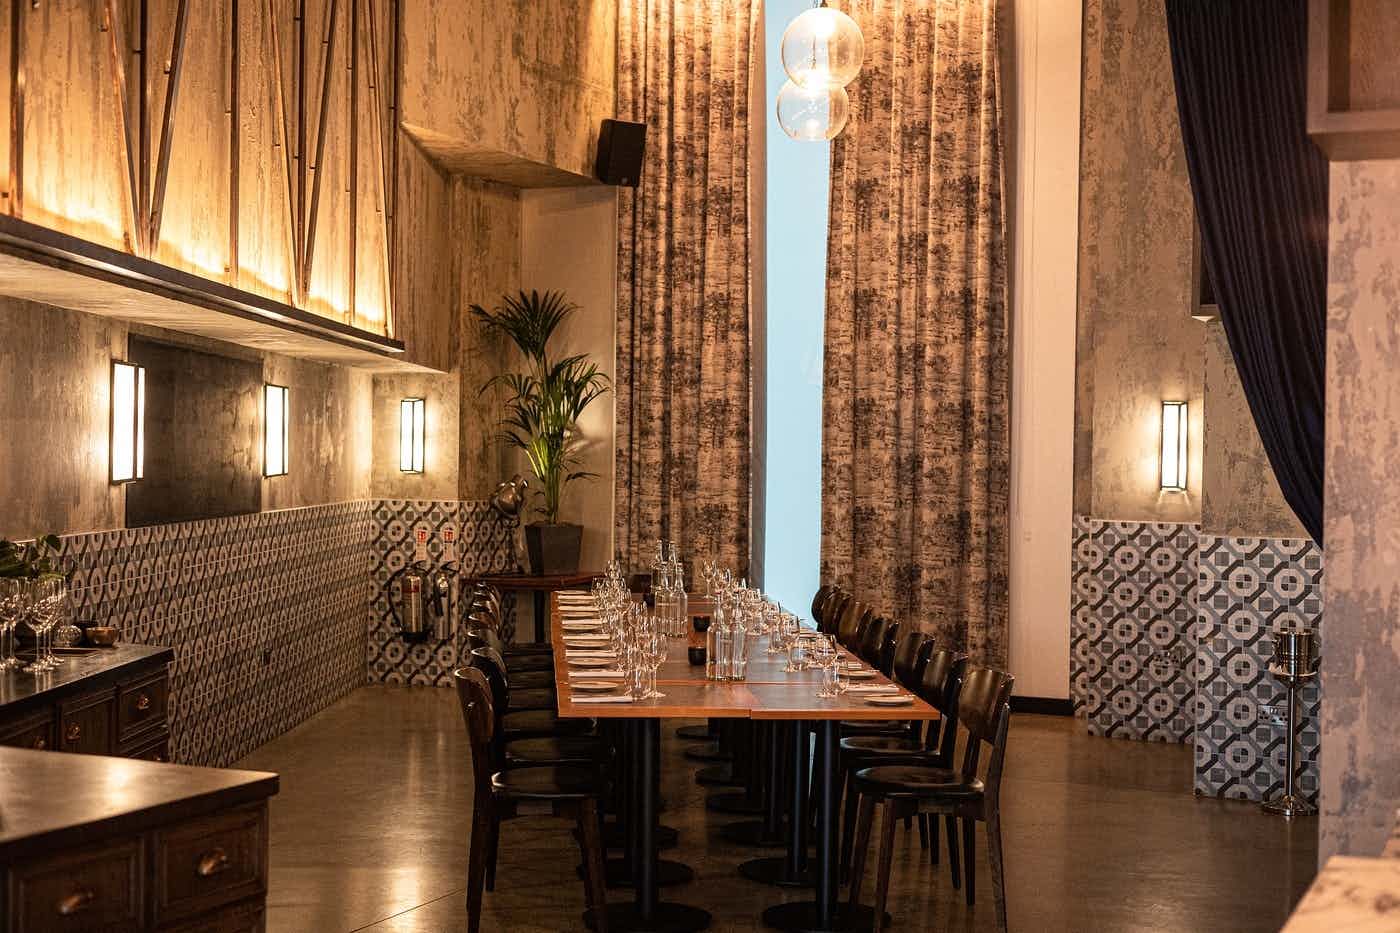 Private Dining Room, Bread Street Kitchen - The City